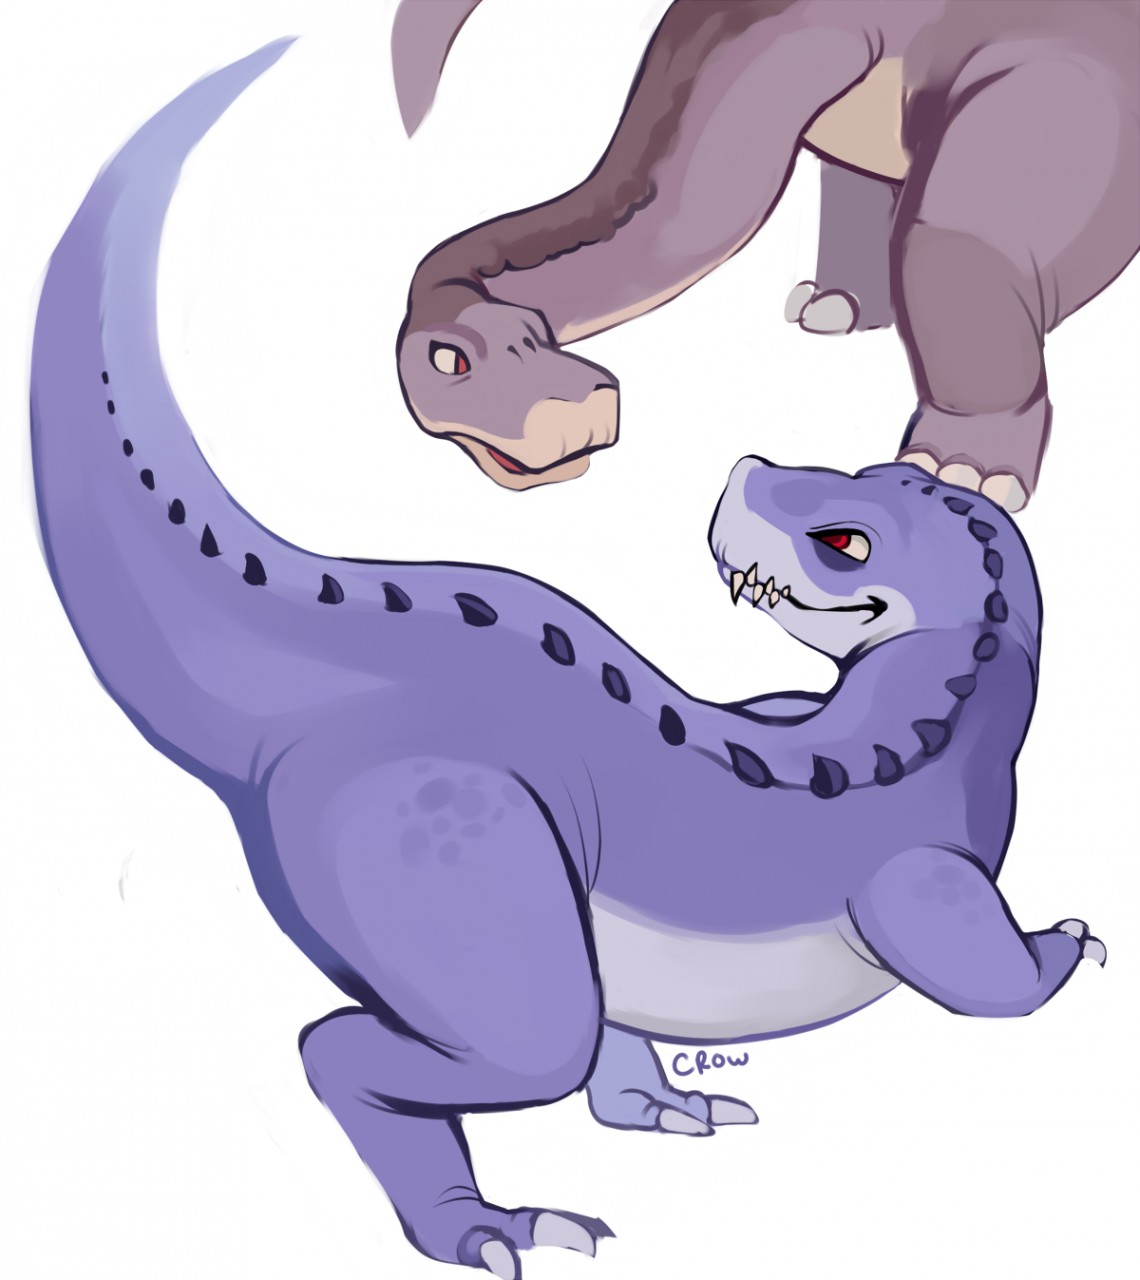 Land before time chomper grown up